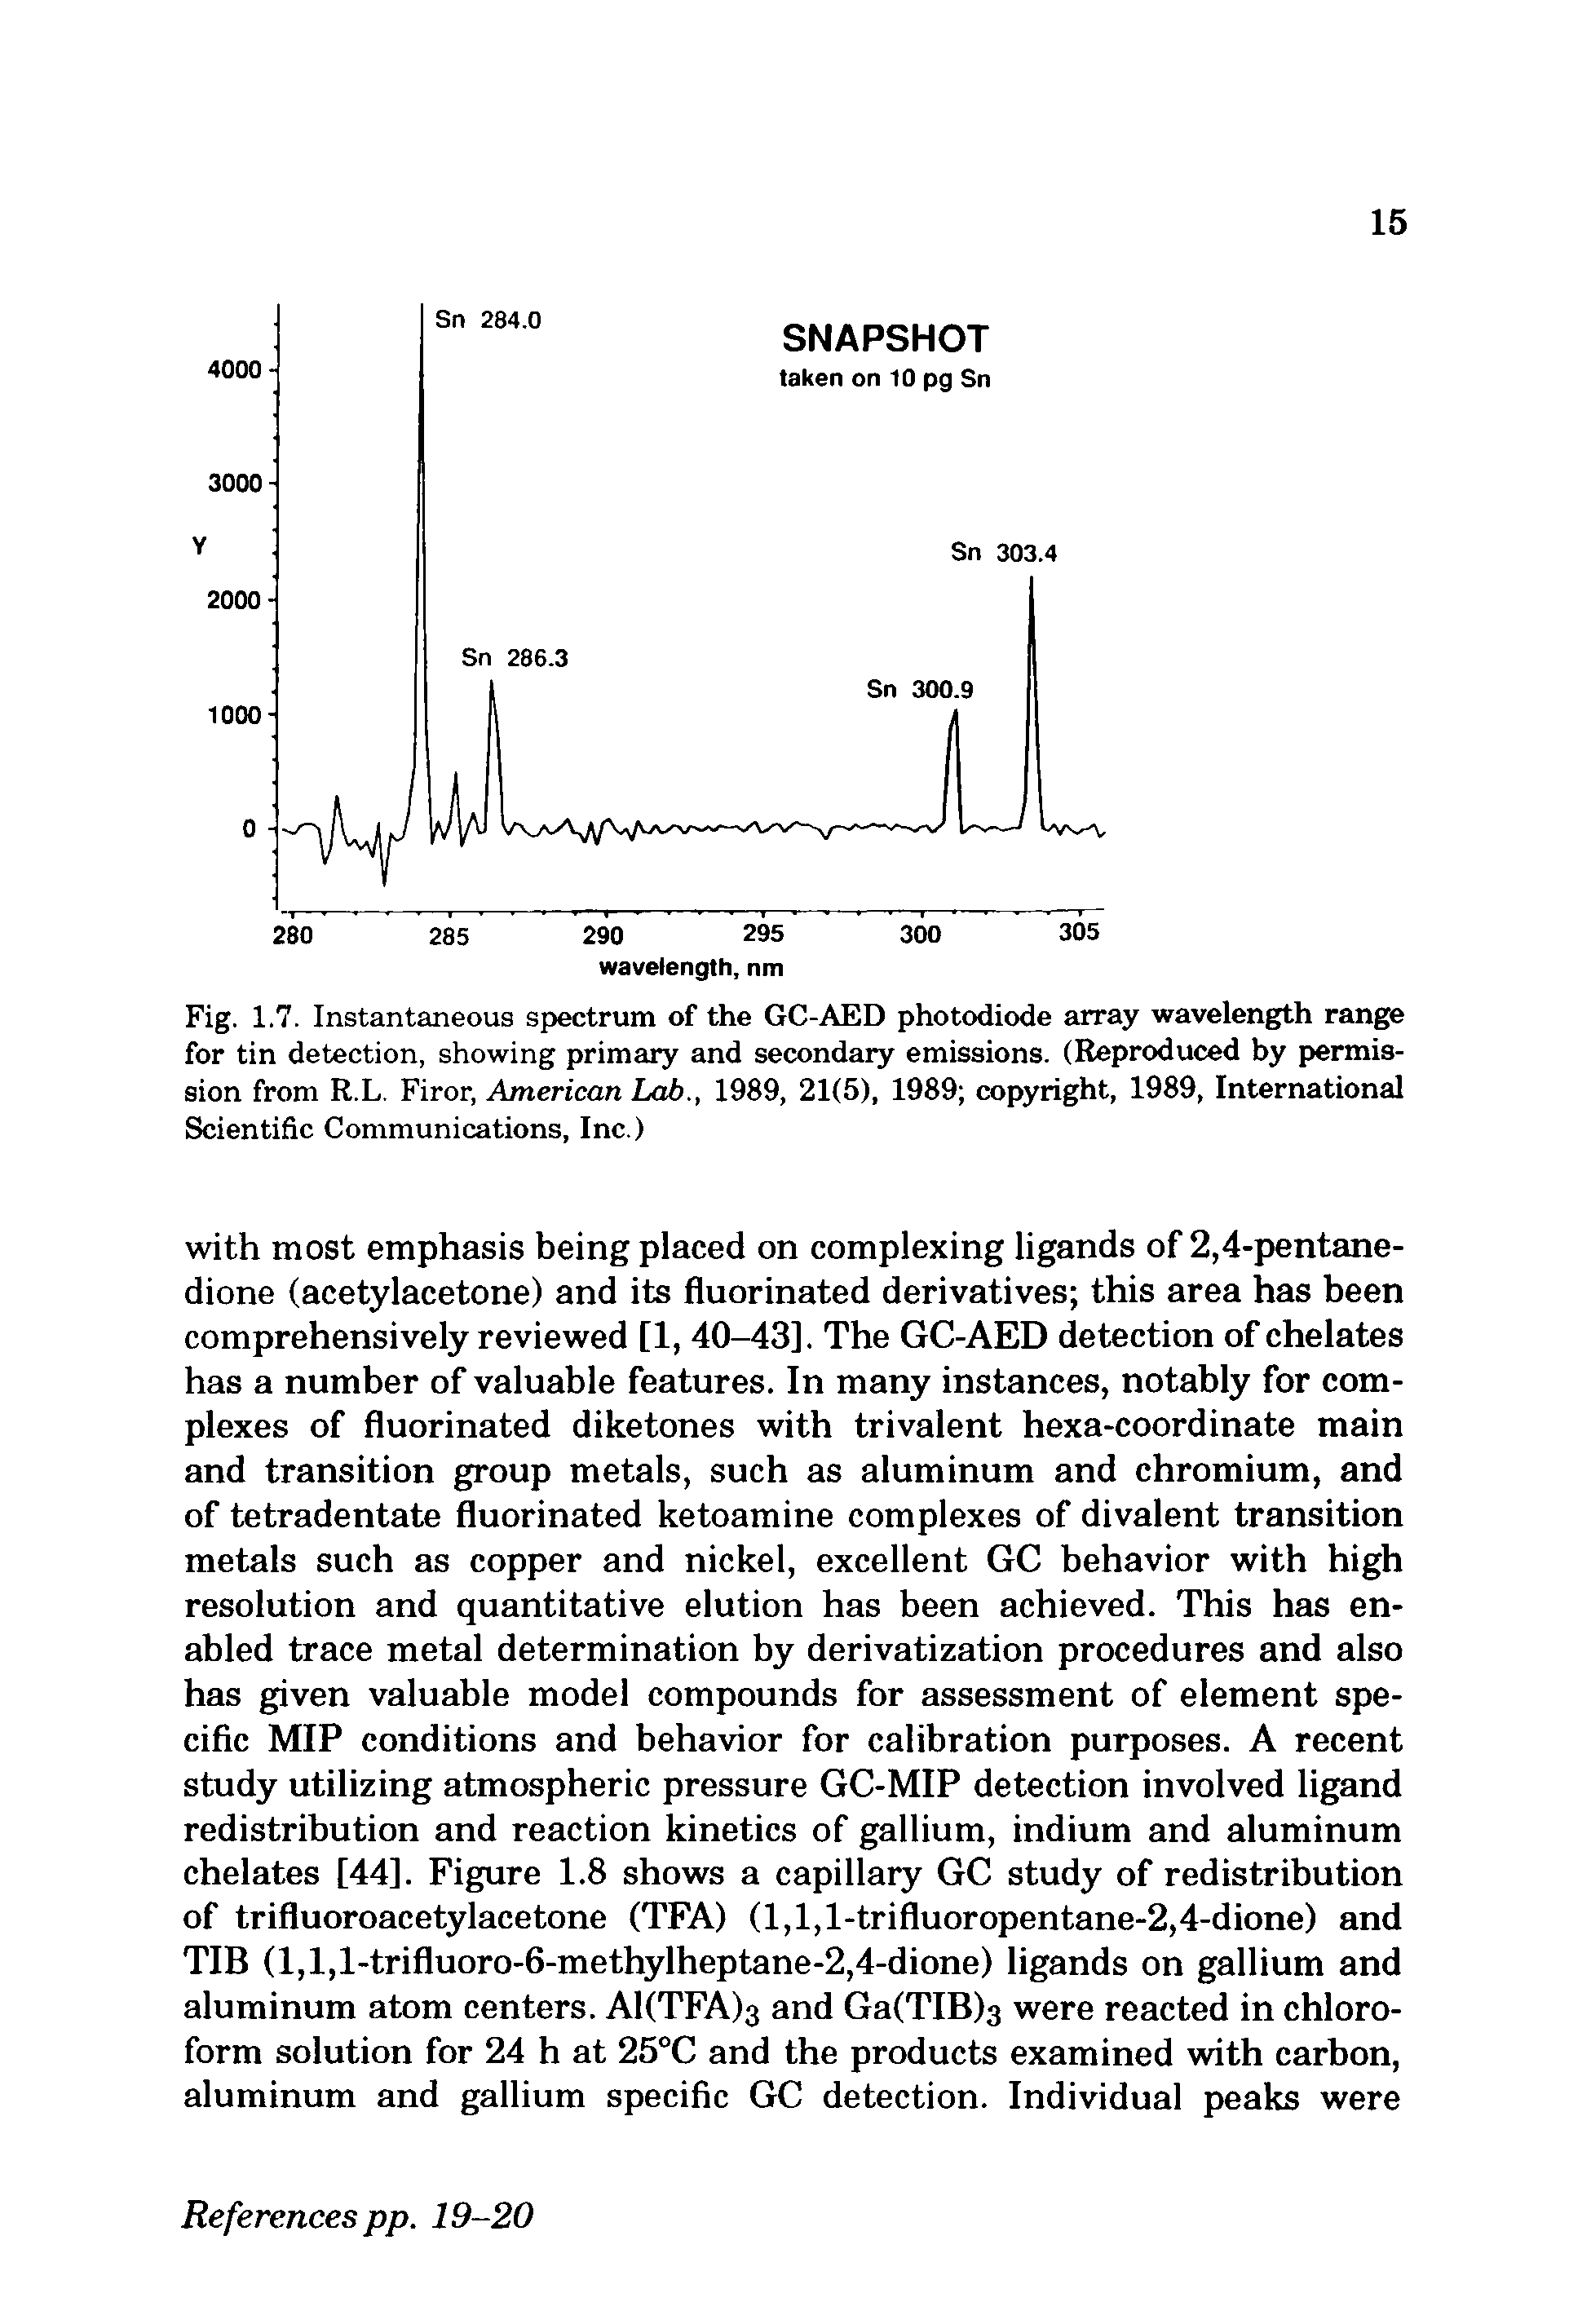 Fig. 1.7. Instantaneous spectrum of the GC-AED photodiode array wavelength rang for tin detection, showing primary and secondary emissions. (Reproduced by permission from R.L. Firor, American Lo6., 1989, 21(5), 1989 copyright, 1989, International Scientific Communications, Inc.)...